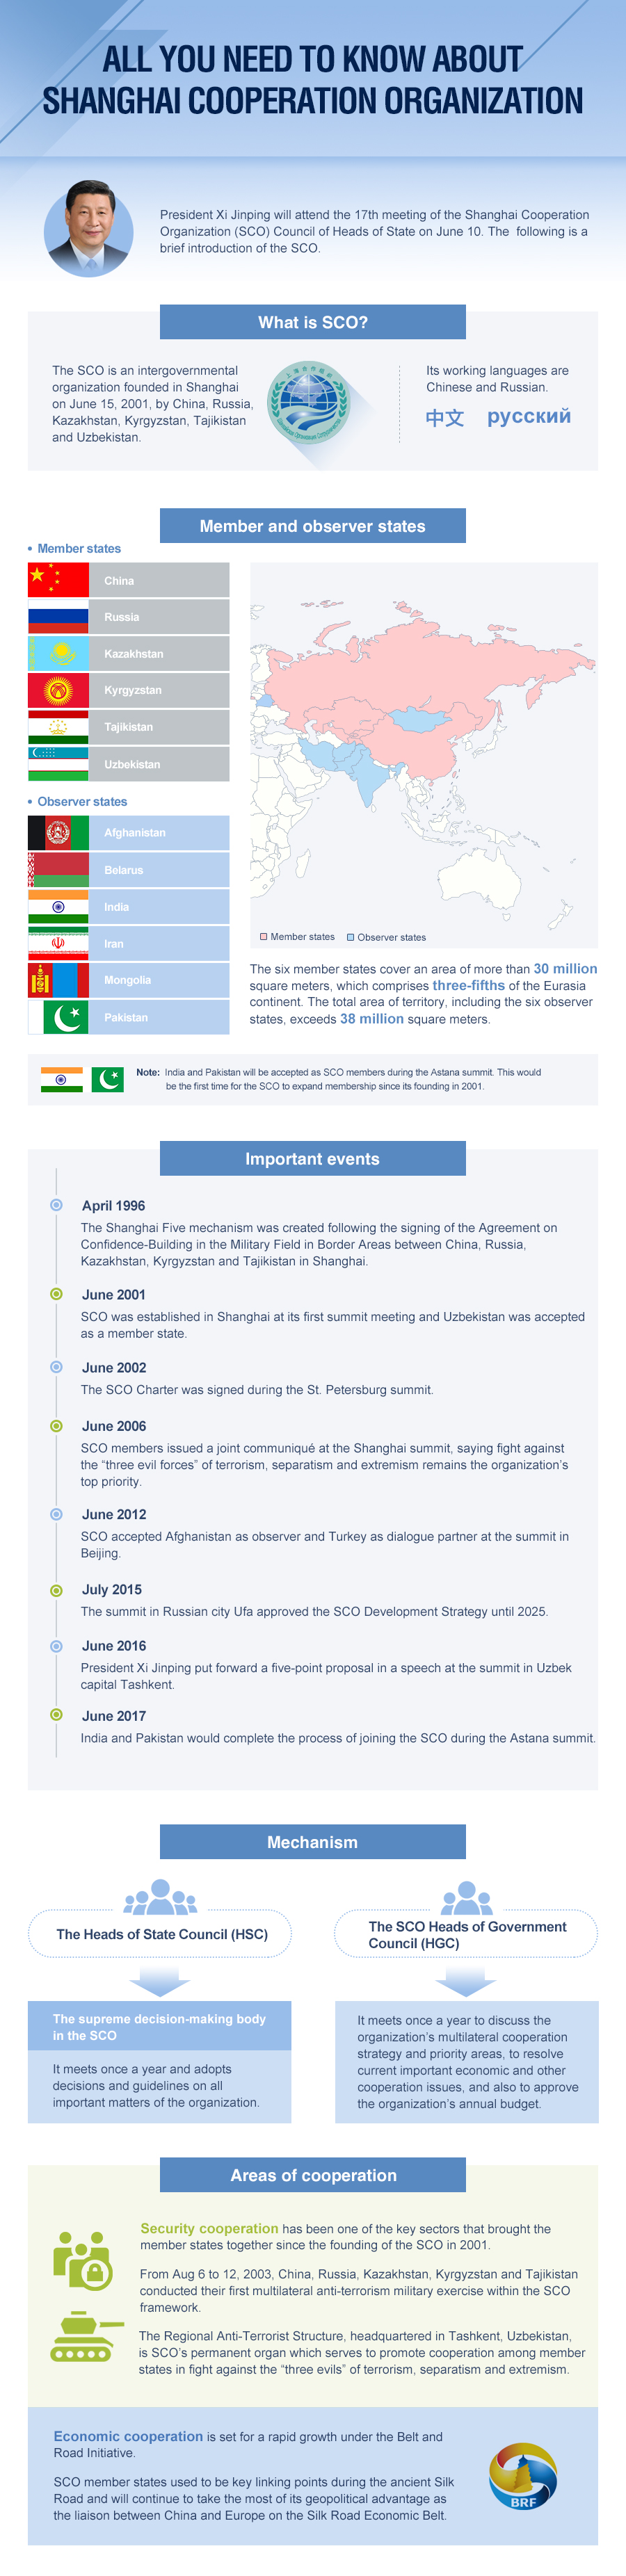 Infographic: All you need to know about SCO